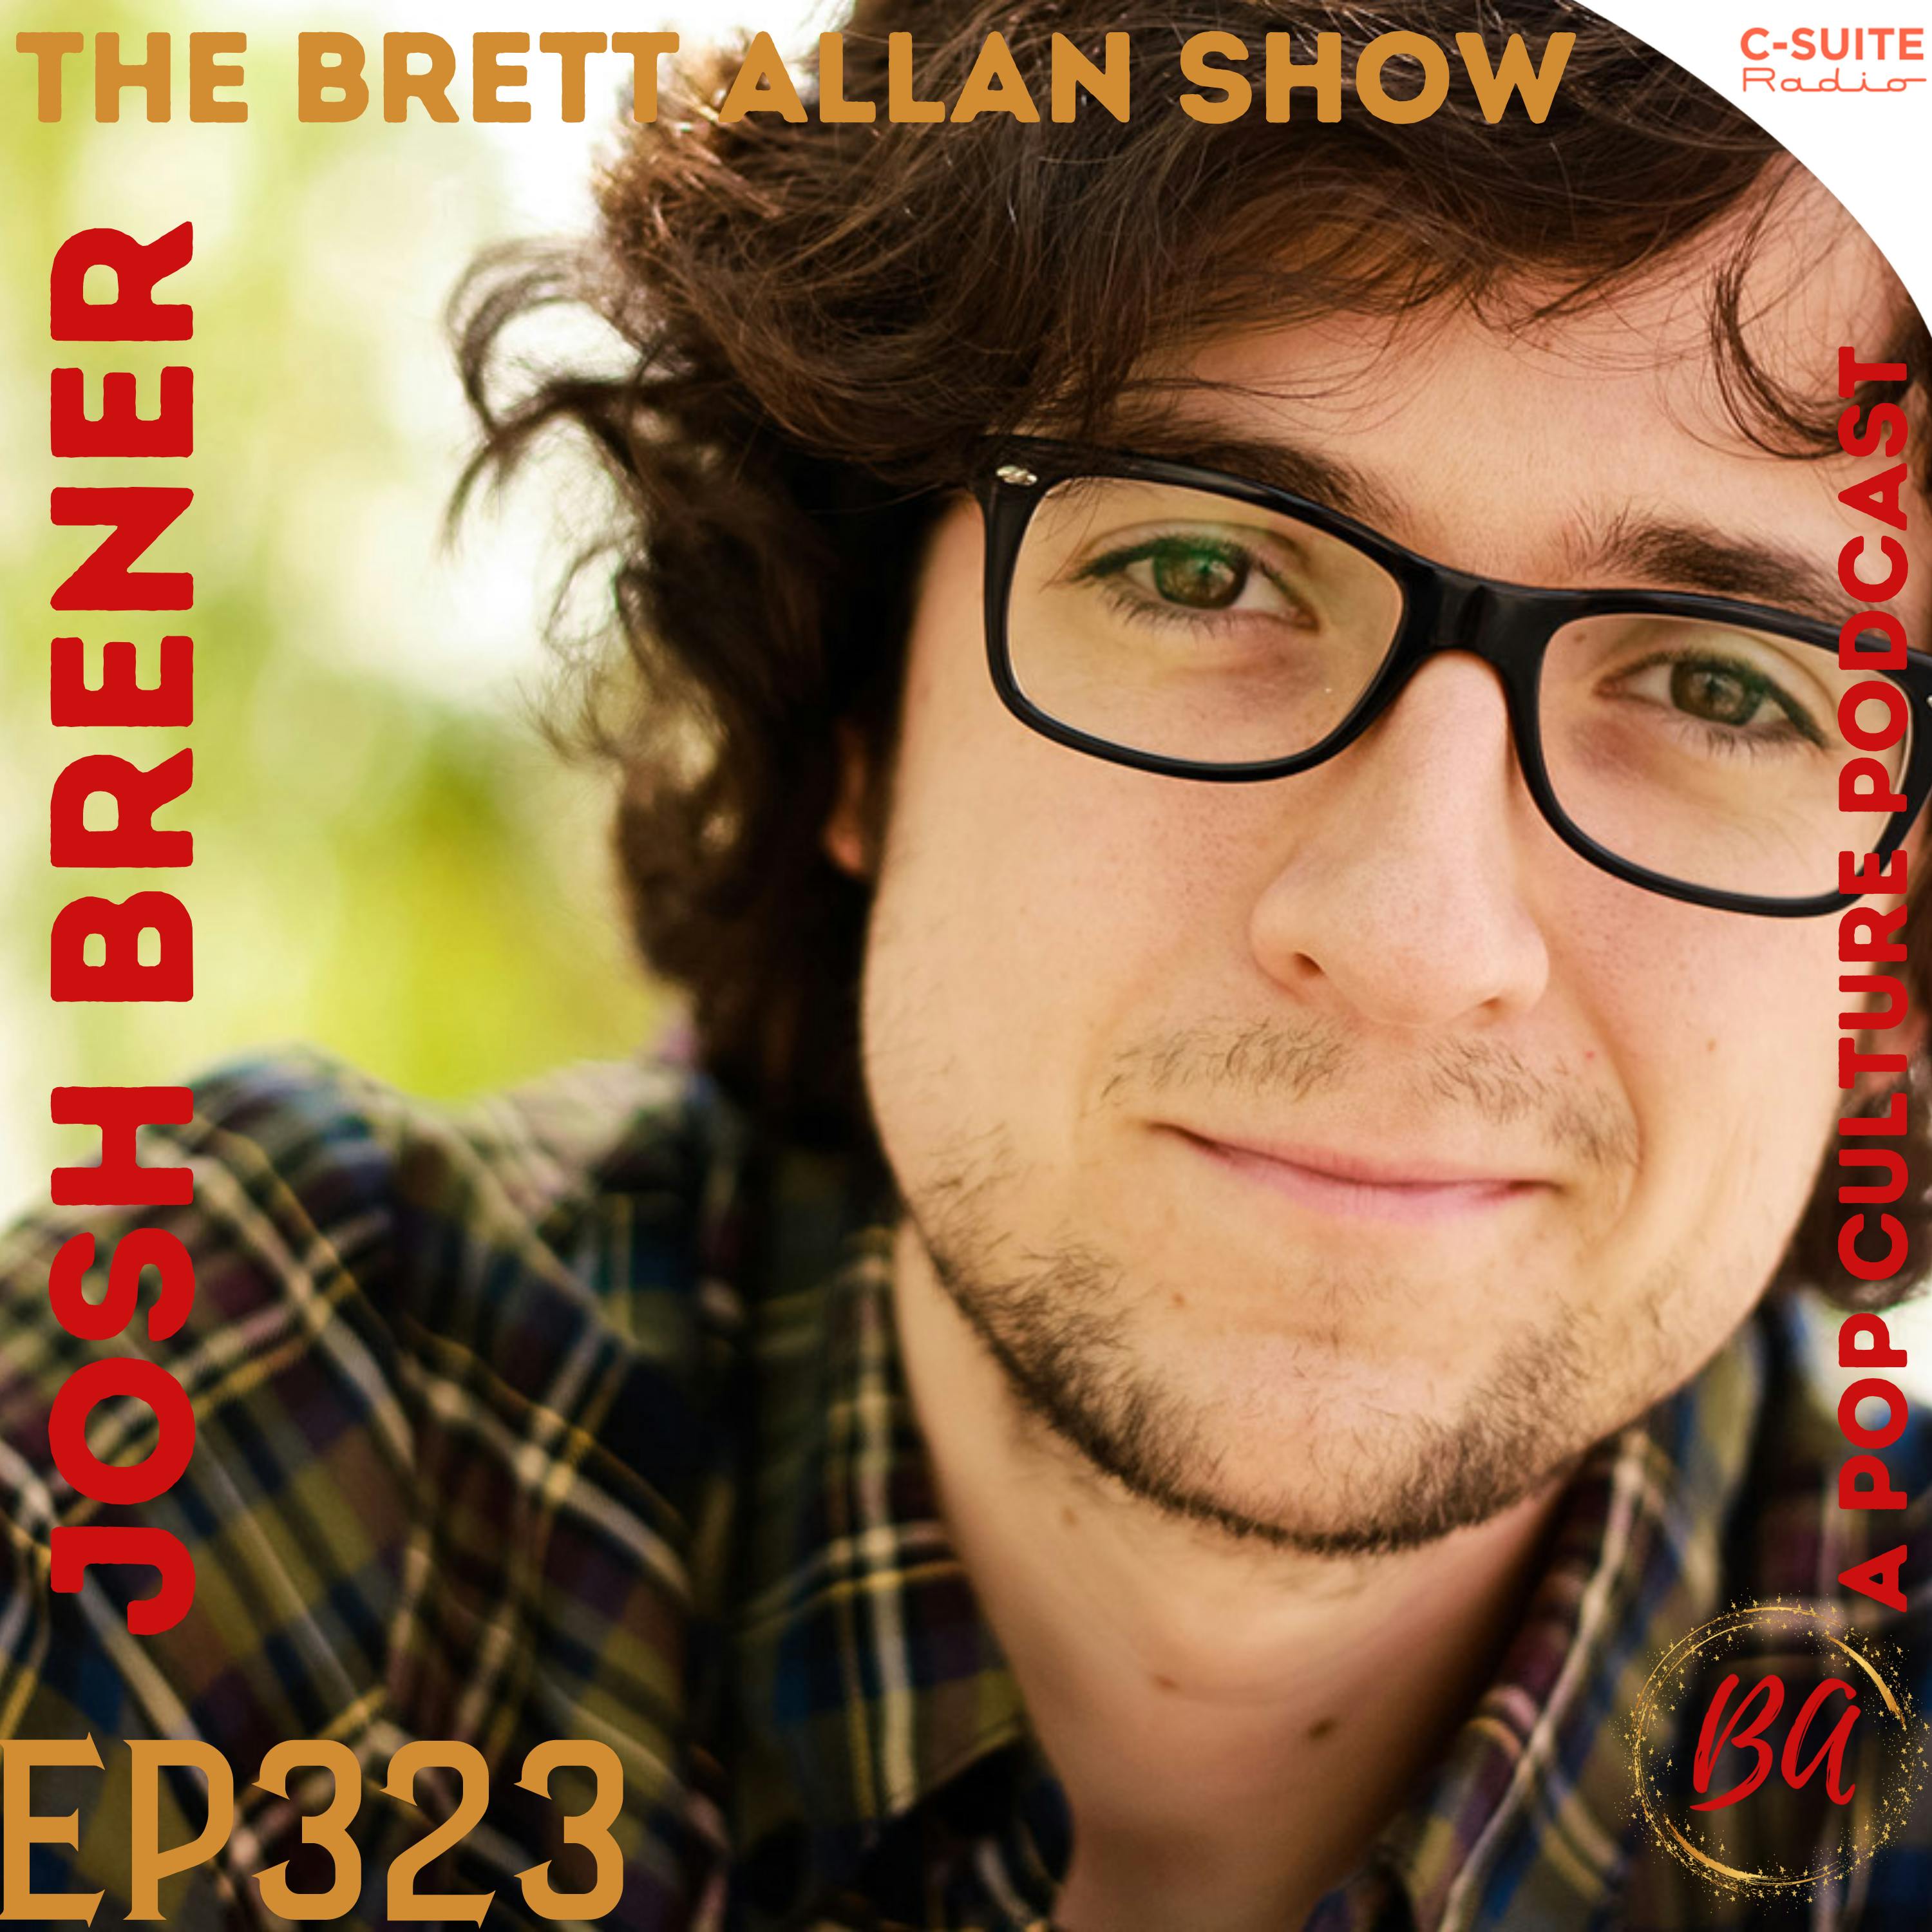 Actor Josh Brener Talks Career, Writing, Silicon Valley Working with his Wife and More | I Have Had A Good Life Image